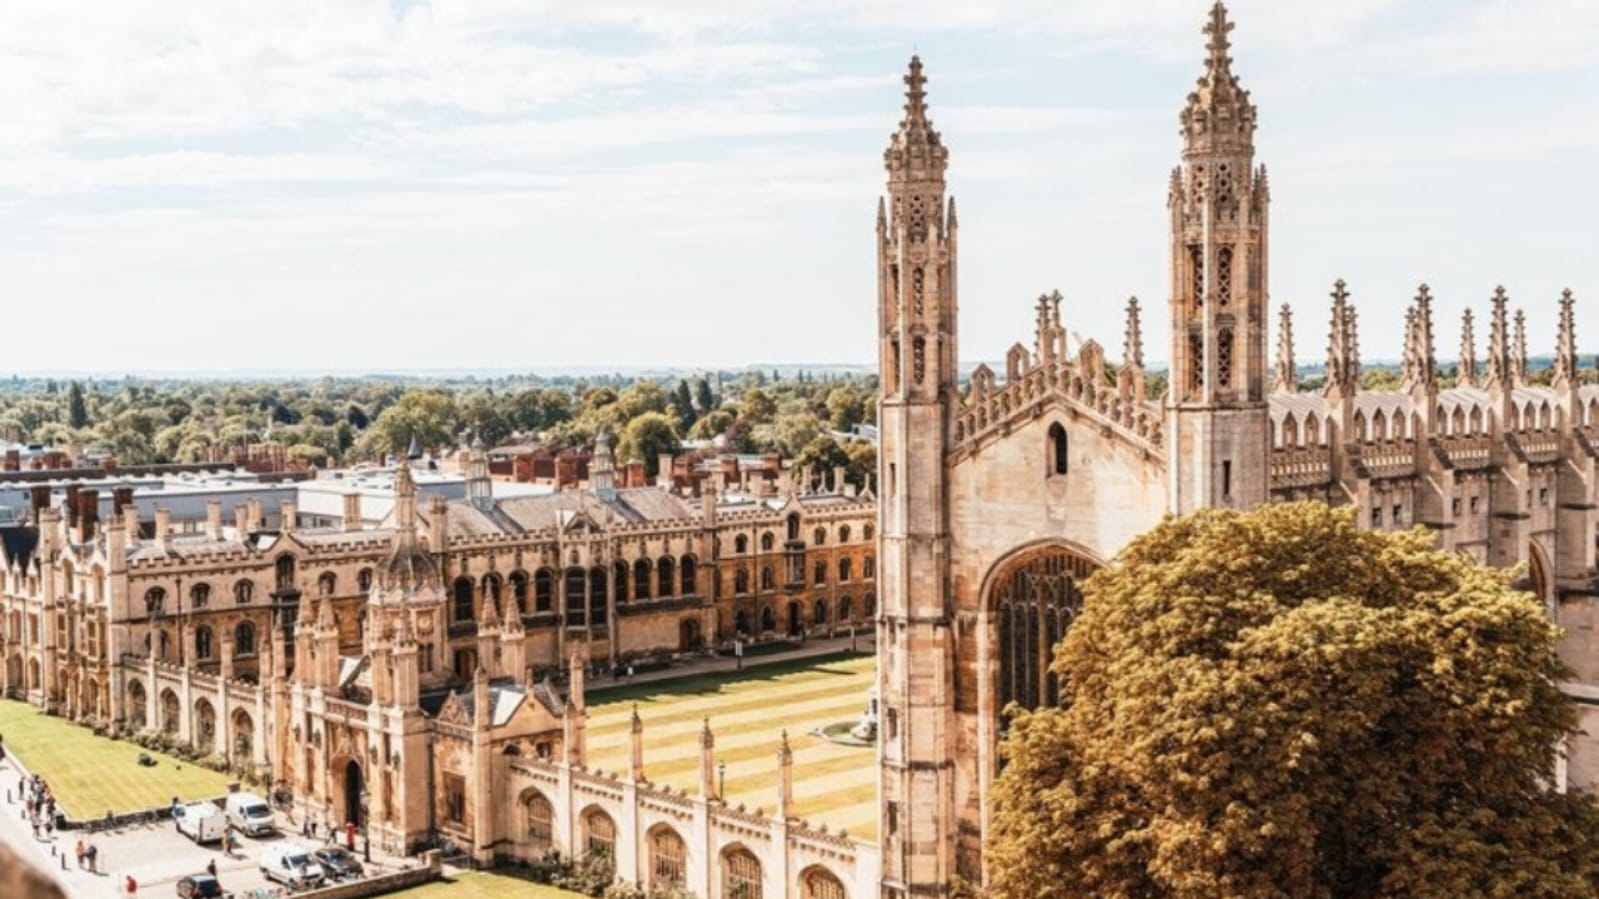 Top 5 Universities for Accounting & Finance in the UK